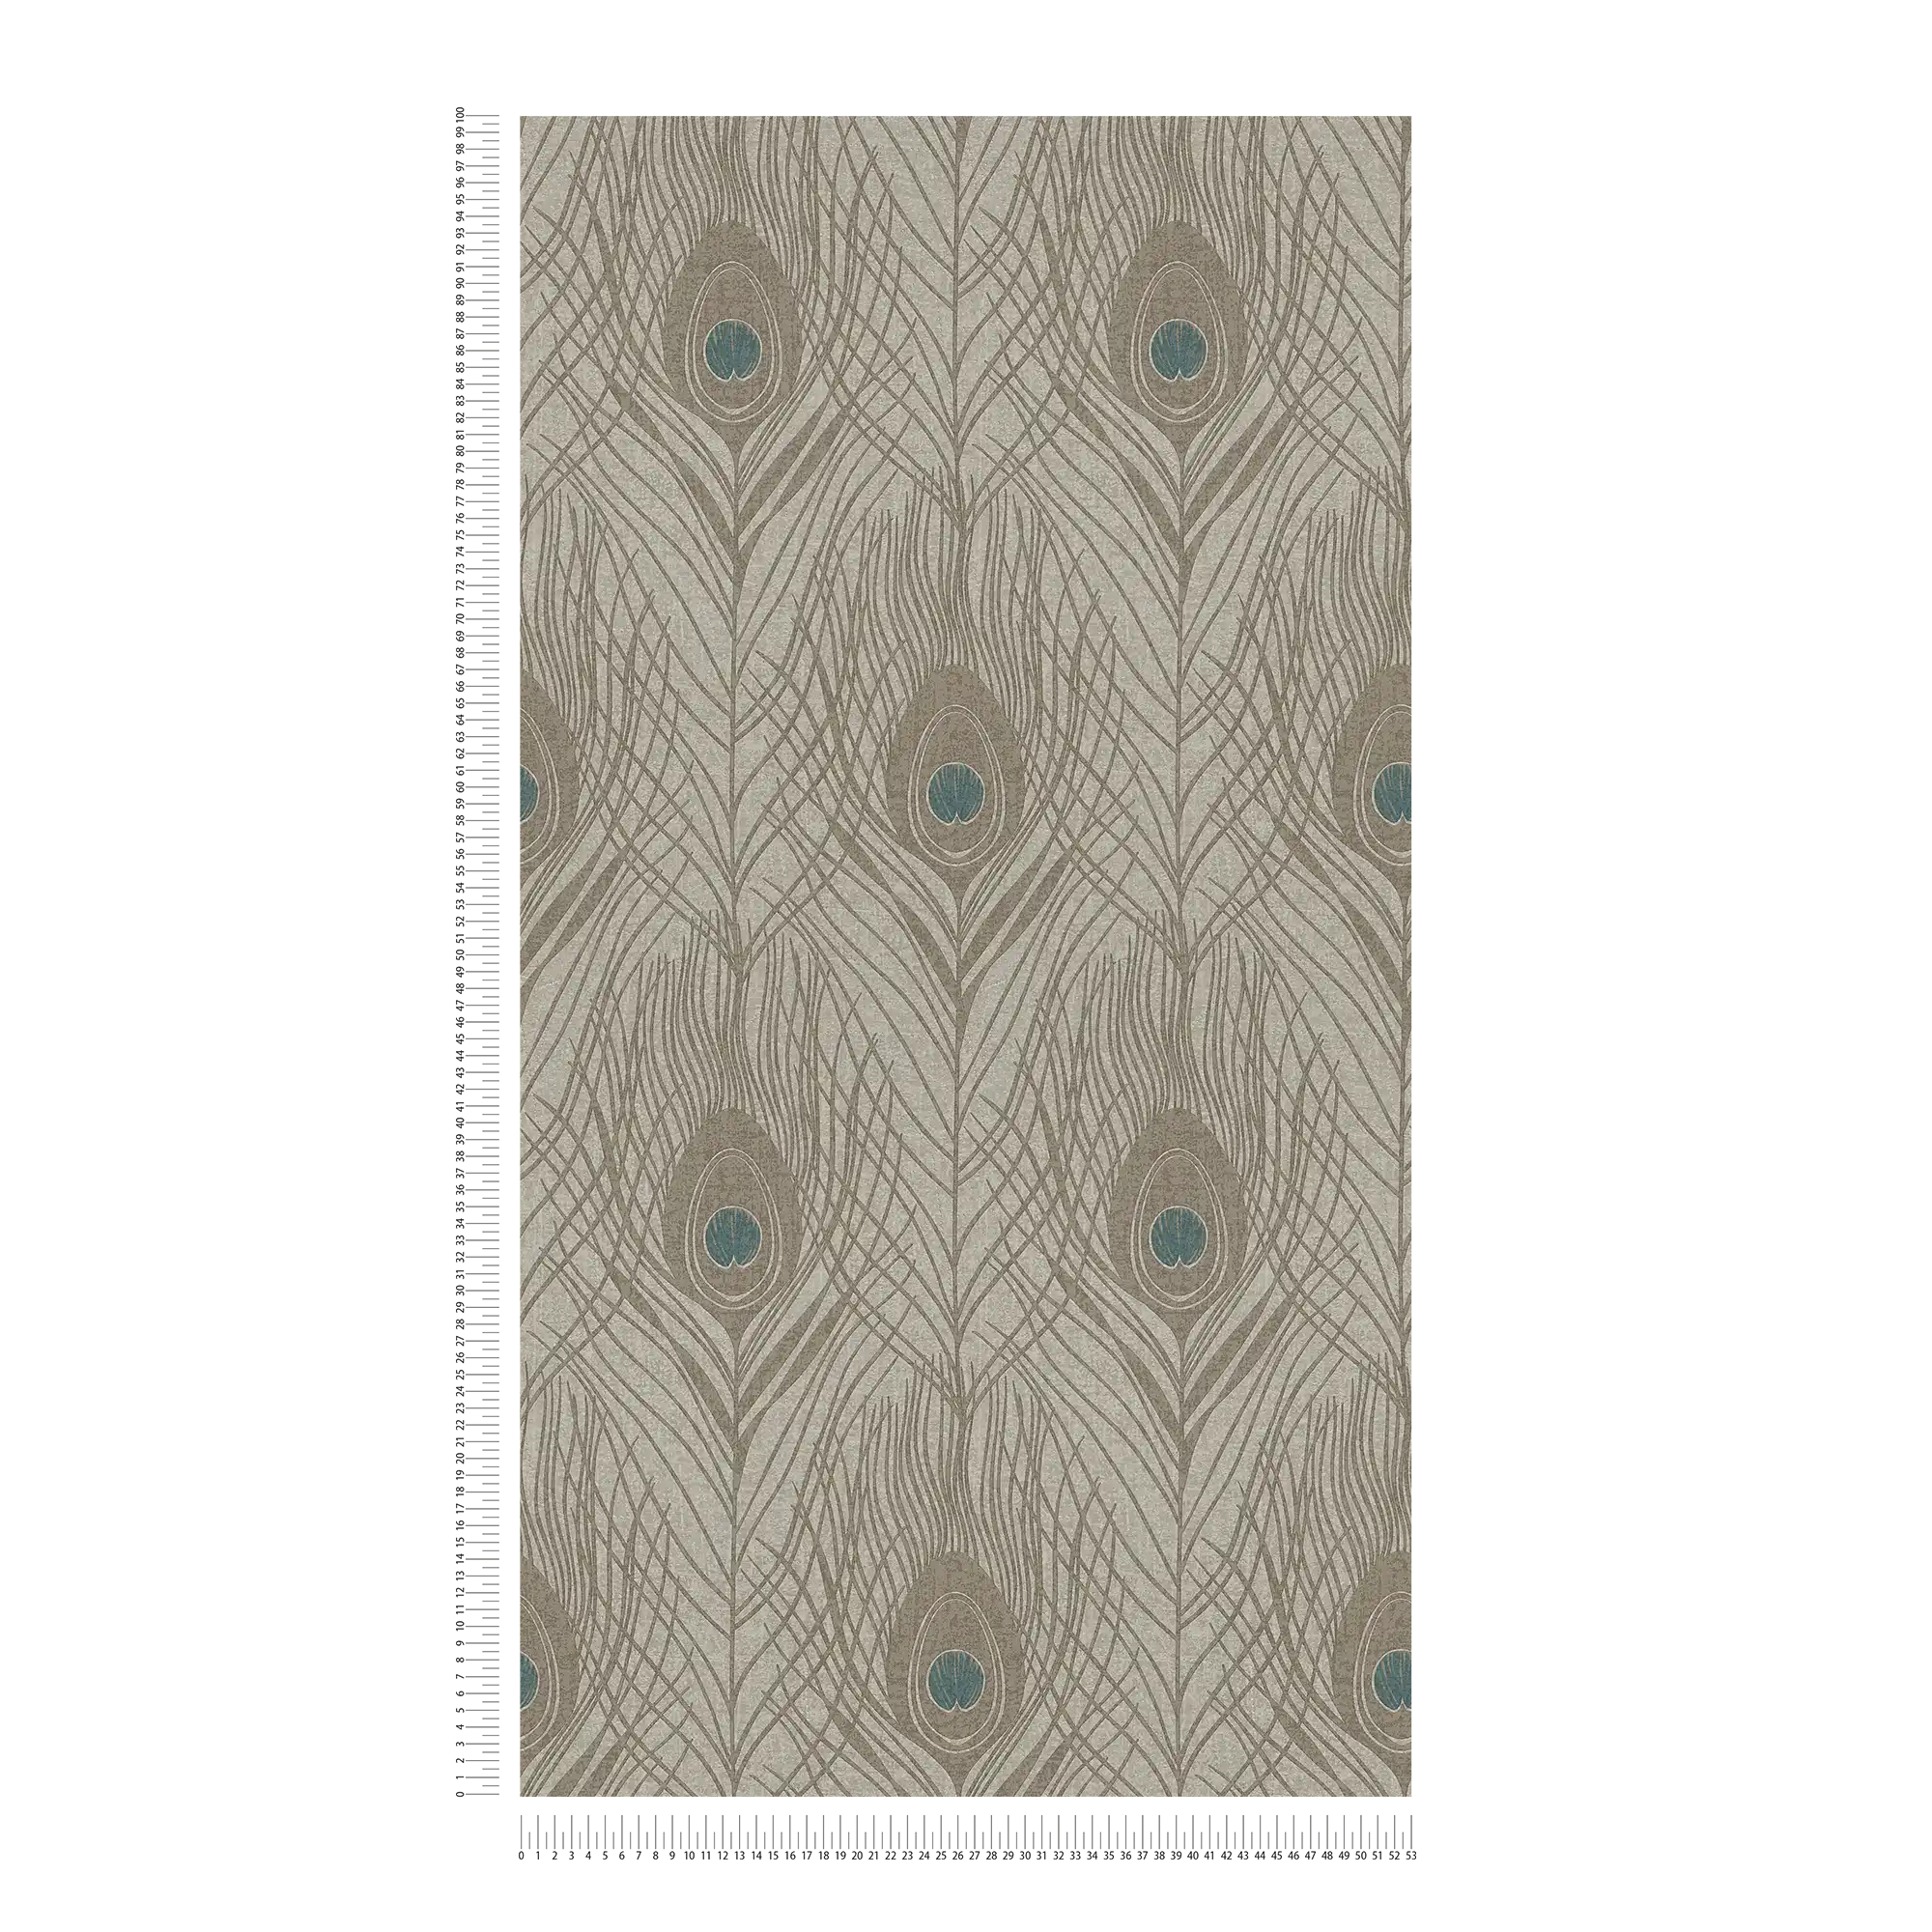             Brown non-woven wallpaper with peacock feathers, detailed - brown, grey, blue
        